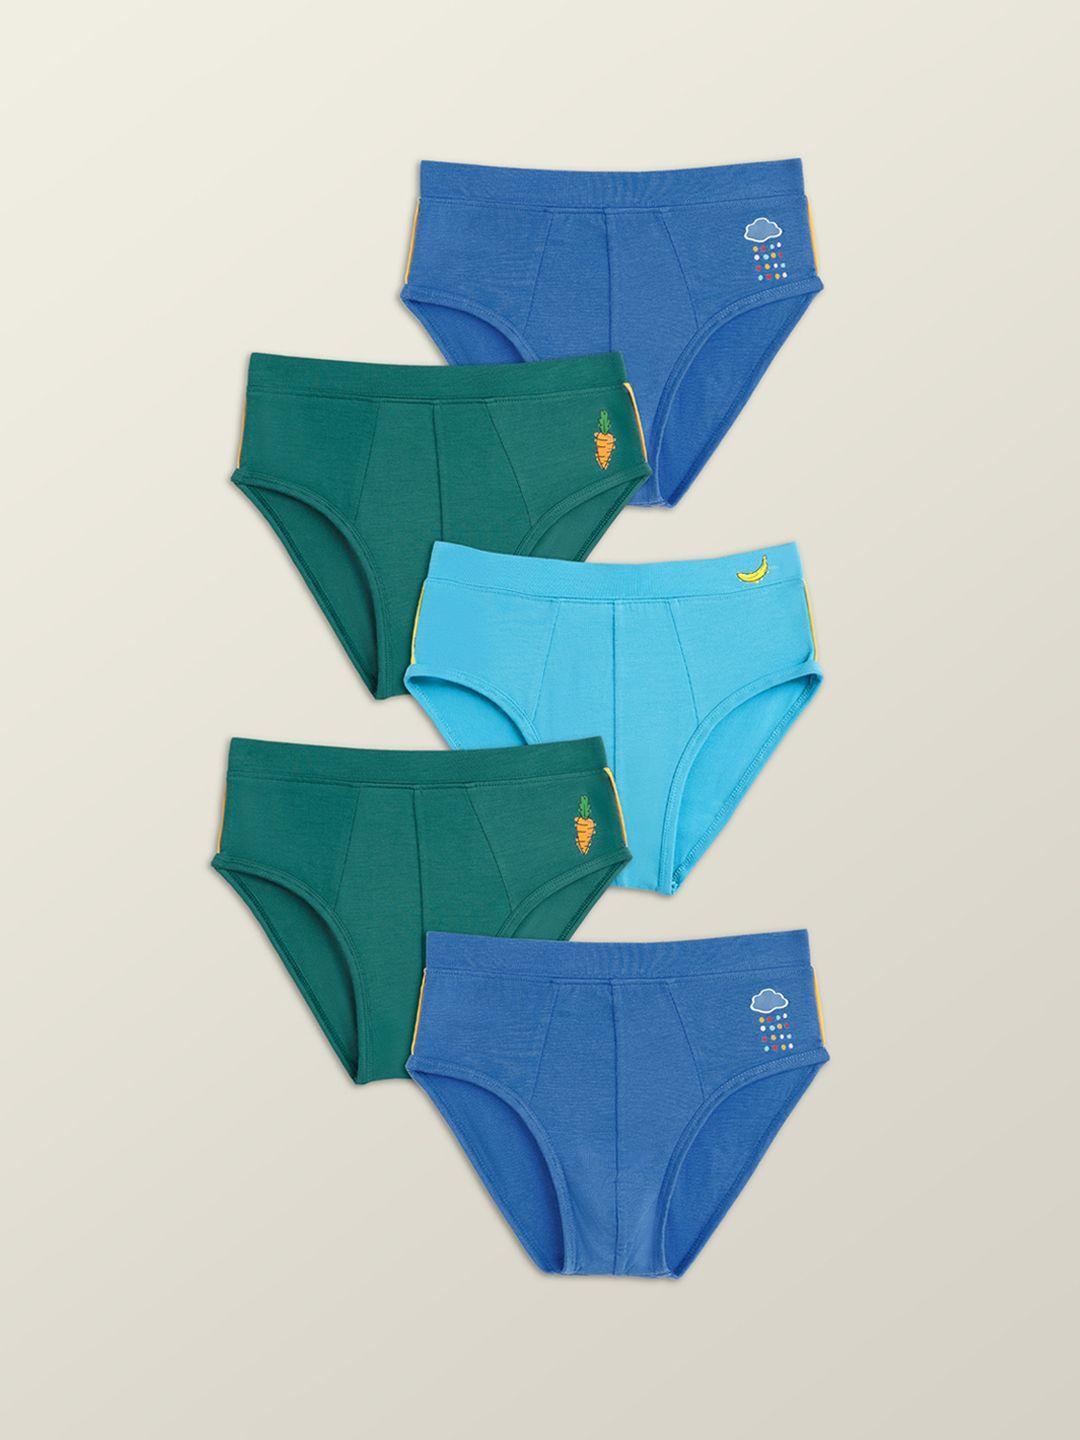 xy life boys blue & green pack of 5 solid anti-microbial boy shorts